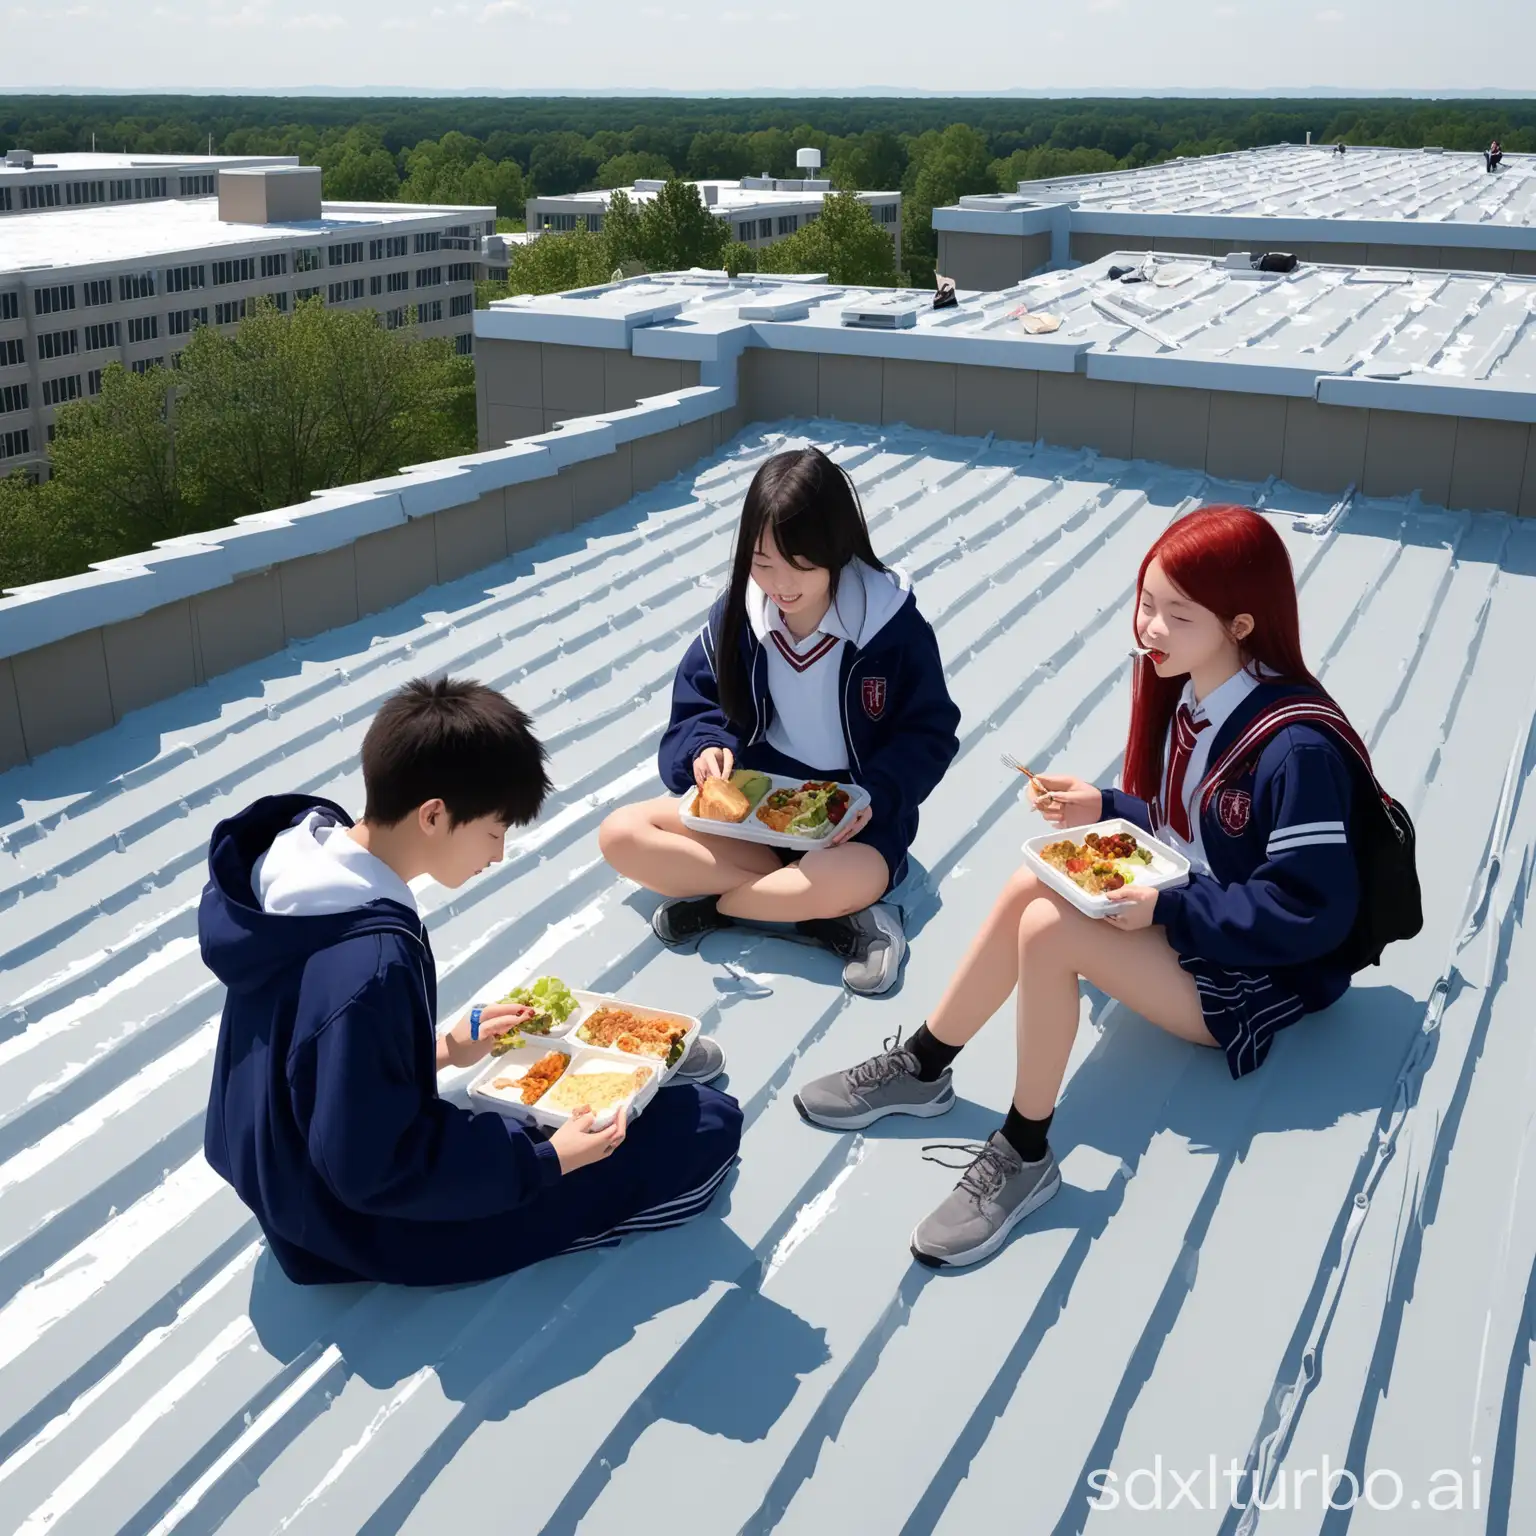 High-School-Students-Enjoying-Lunch-on-Education-Building-Rooftop